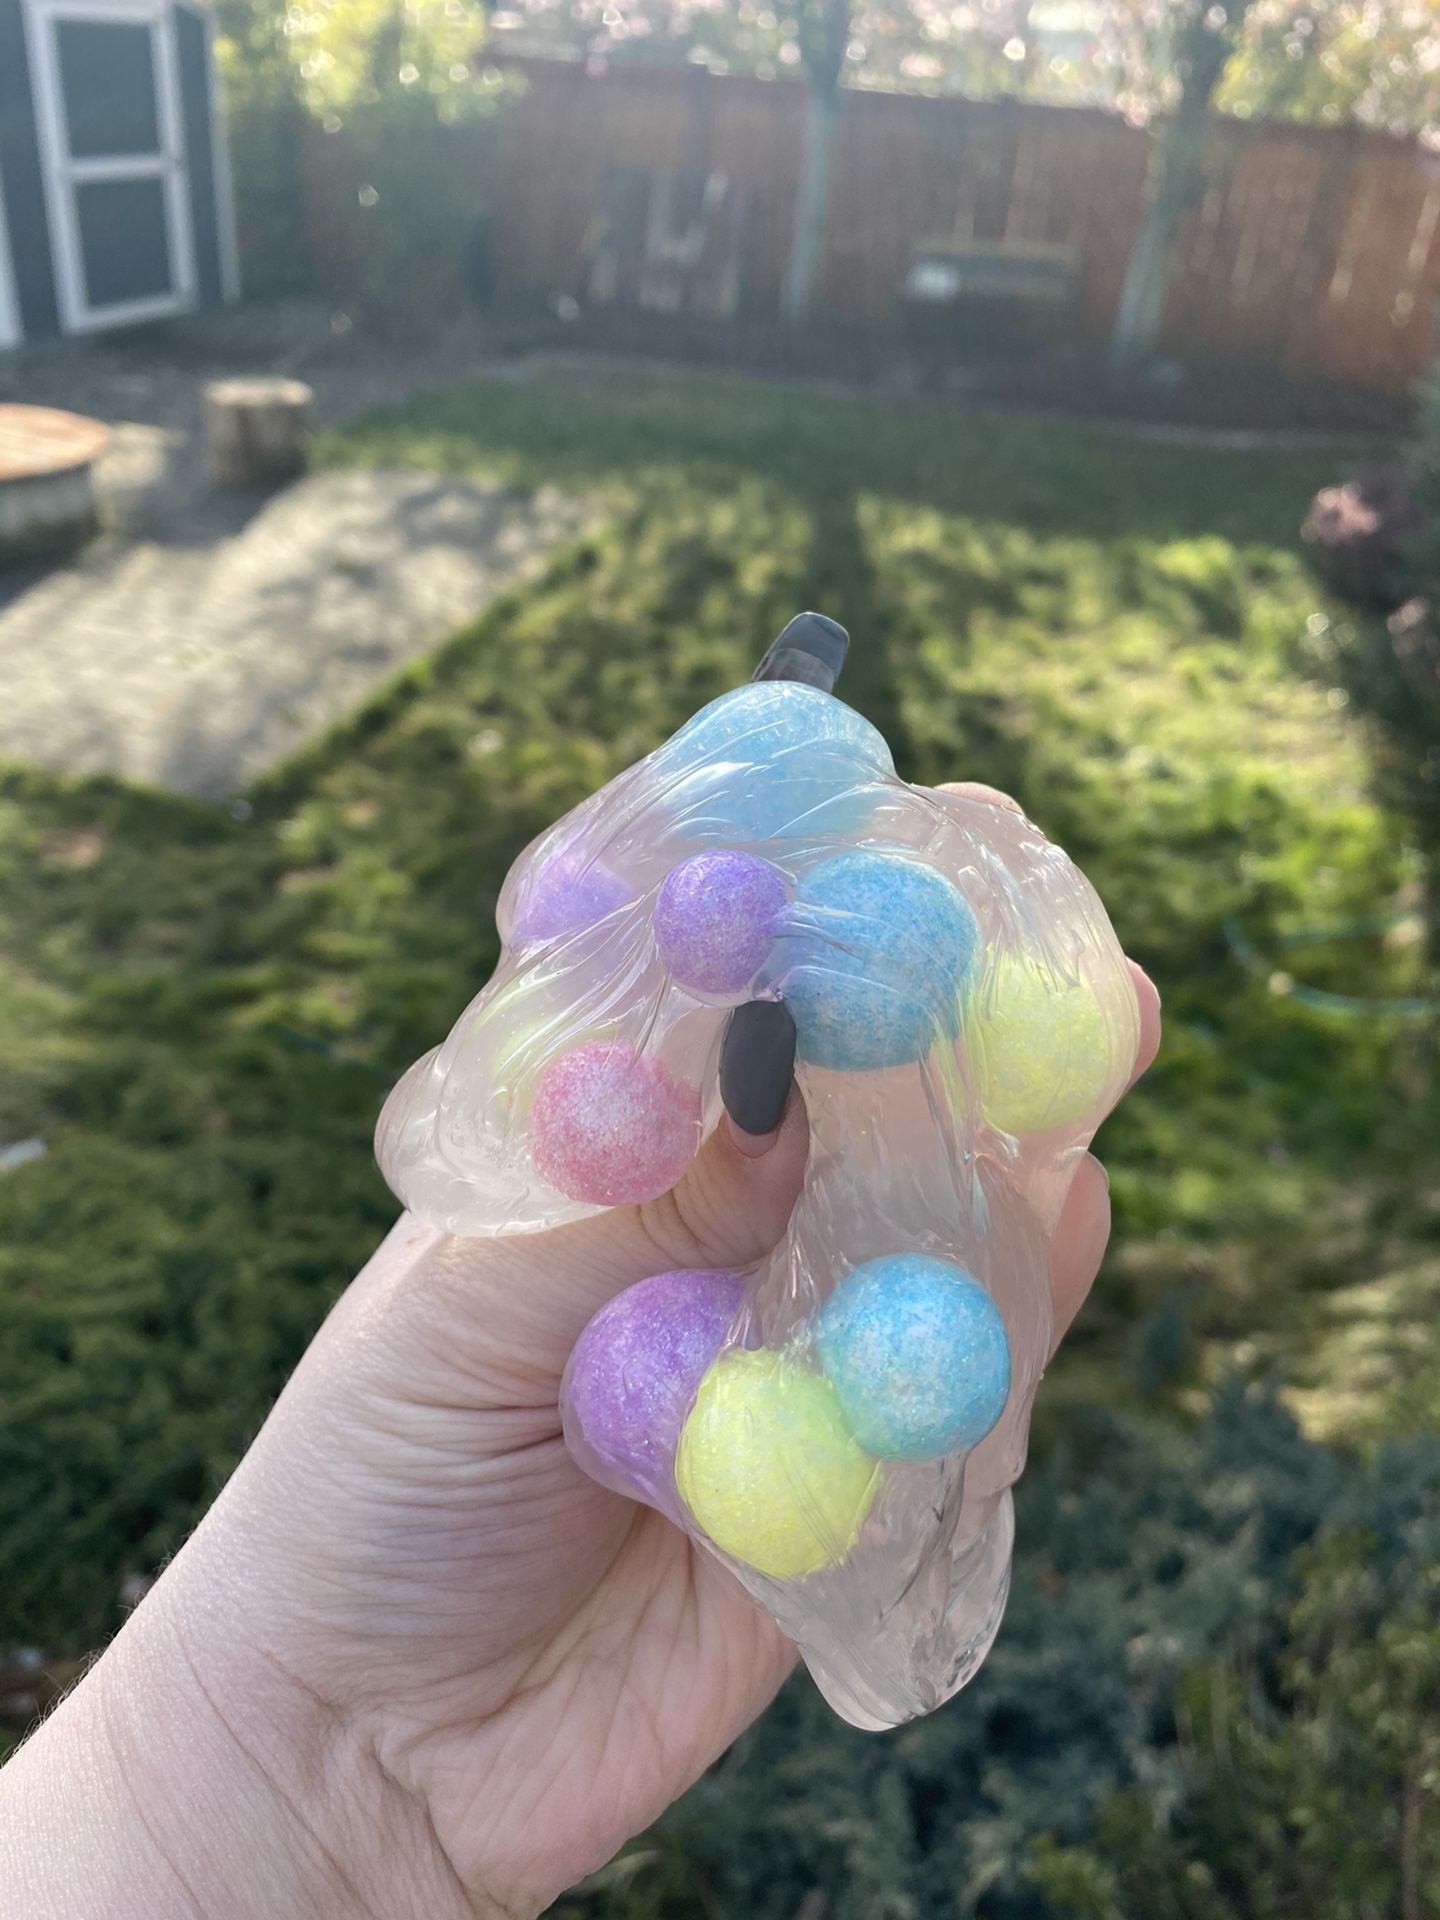 “Easter Egg Hunt” Clear Slime W/ Multi Colored and Sized Glitter Floam Balls